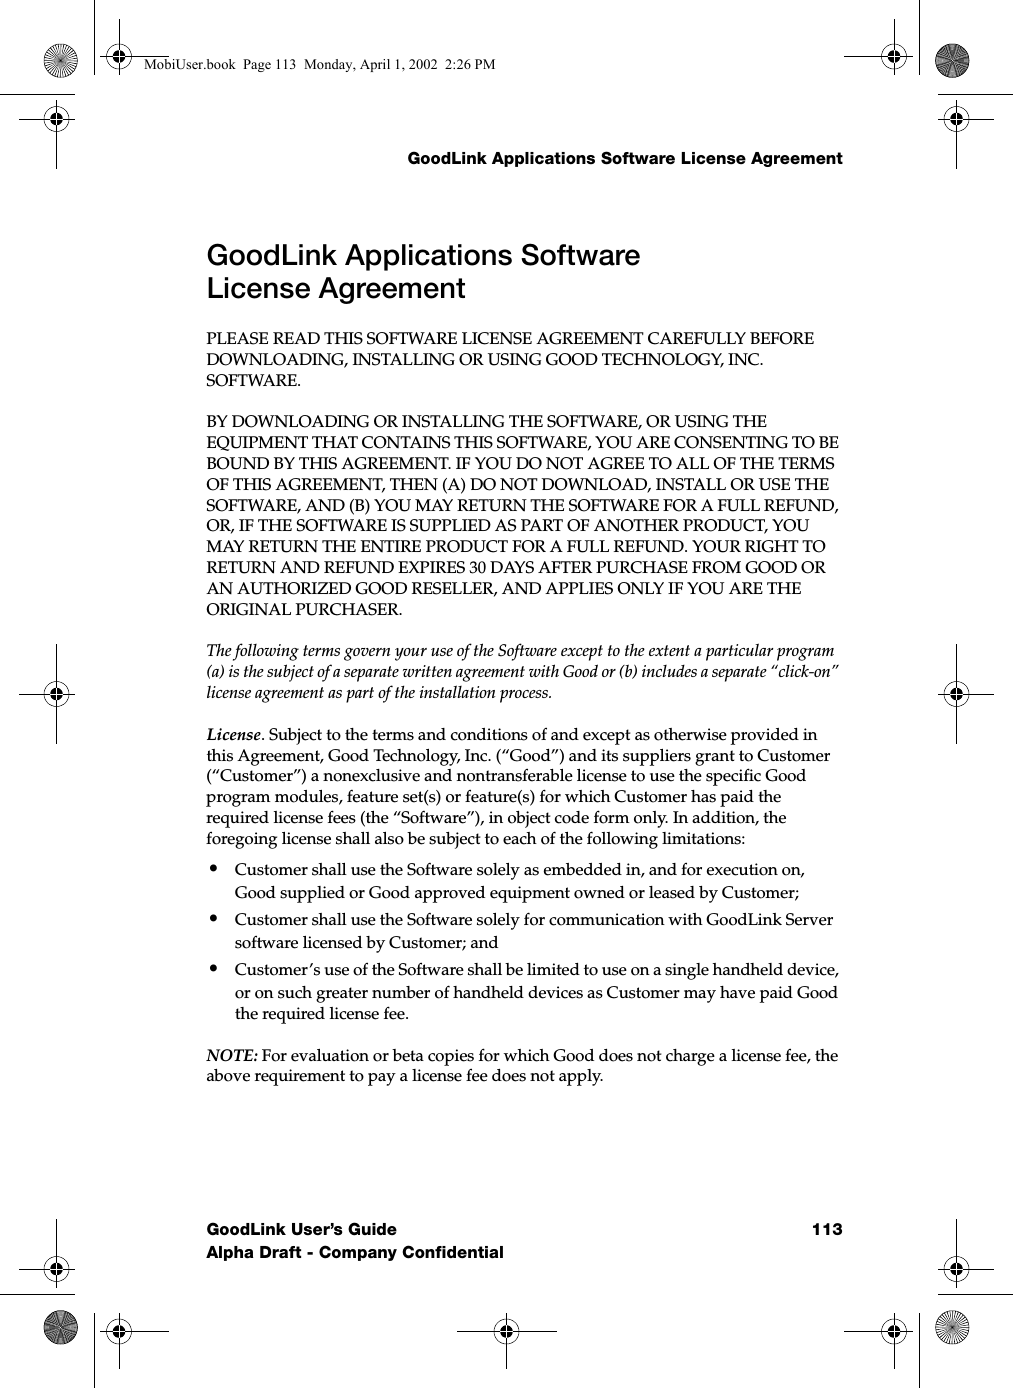 GoodLink Applications Software License AgreementGoodLink User’s Guide 113Alpha Draft - Company ConfidentialGoodLink Applications Software License AgreementPLEASE READ THIS SOFTWARE LICENSE AGREEMENT CAREFULLY BEFORE DOWNLOADING, INSTALLING OR USING GOOD TECHNOLOGY, INC. SOFTWARE. BY DOWNLOADING OR INSTALLING THE SOFTWARE, OR USING THE EQUIPMENT THAT CONTAINS THIS SOFTWARE, YOU ARE CONSENTING TO BE BOUND BY THIS AGREEMENT. IF YOU DO NOT AGREE TO ALL OF THE TERMS OF THIS AGREEMENT, THEN (A) DO NOT DOWNLOAD, INSTALL OR USE THE SOFTWARE, AND (B) YOU MAY RETURN THE SOFTWARE FOR A FULL REFUND, OR, IF THE SOFTWARE IS SUPPLIED AS PART OF ANOTHER PRODUCT, YOU MAY RETURN THE ENTIRE PRODUCT FOR A FULL REFUND. YOUR RIGHT TO RETURN AND REFUND EXPIRES 30 DAYS AFTER PURCHASE FROM GOOD OR AN AUTHORIZED GOOD RESELLER, AND APPLIES ONLY IF YOU ARE THE ORIGINAL PURCHASER. The following terms govern your use of the Software except to the extent a particular program (a) is the subject of a separate written agreement with Good or (b) includes a separate “click-on” license agreement as part of the installation process.License. Subject to the terms and conditions of and except as otherwise provided in this Agreement, Good Technology, Inc. (“Good”) and its suppliers grant to Customer (“Customer”) a nonexclusive and nontransferable license to use the specific Good program modules, feature set(s) or feature(s) for which Customer has paid the required license fees (the “Software”), in object code form only. In addition, the foregoing license shall also be subject to each of the following limitations:•Customer shall use the Software solely as embedded in, and for execution on, Good supplied or Good approved equipment owned or leased by Customer;•Customer shall use the Software solely for communication with GoodLink Server software licensed by Customer; and •Customer’s use of the Software shall be limited to use on a single handheld device, or on such greater number of handheld devices as Customer may have paid Good the required license fee.NOTE: For evaluation or beta copies for which Good does not charge a license fee, the above requirement to pay a license fee does not apply.MobiUser.book  Page 113  Monday, April 1, 2002  2:26 PM